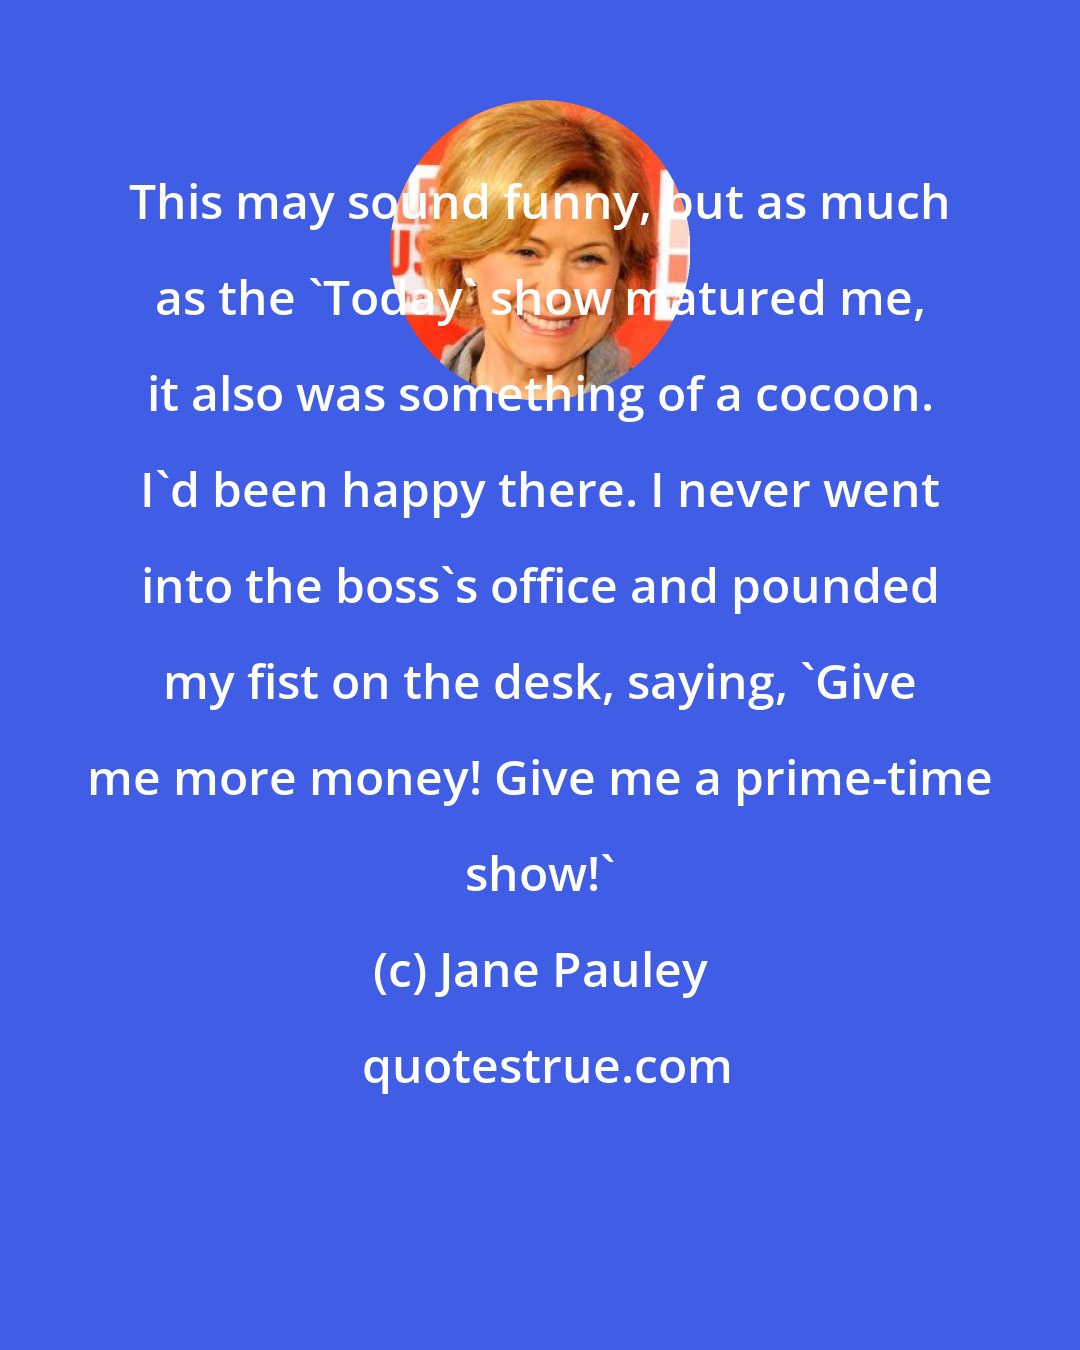 Jane Pauley: This may sound funny, but as much as the 'Today' show matured me, it also was something of a cocoon. I'd been happy there. I never went into the boss's office and pounded my fist on the desk, saying, 'Give me more money! Give me a prime-time show!'